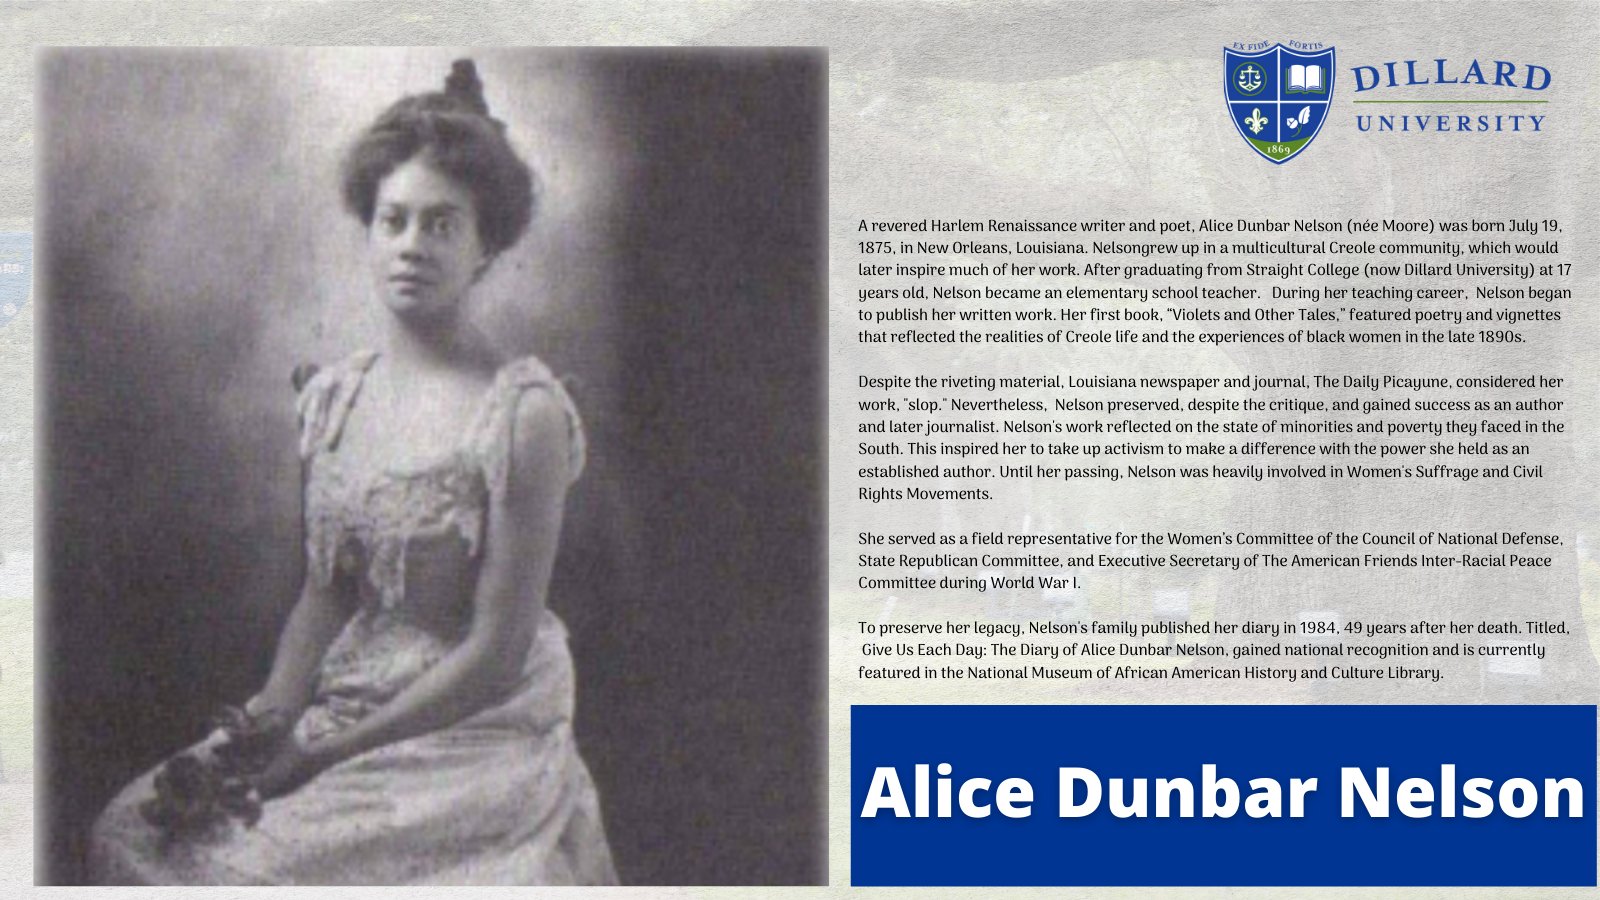 Dillard university on day alice dunbar nelson a revered harlem renaissance writer and poet alice dunbar nelson was born july in new orleans after graduating from straight college